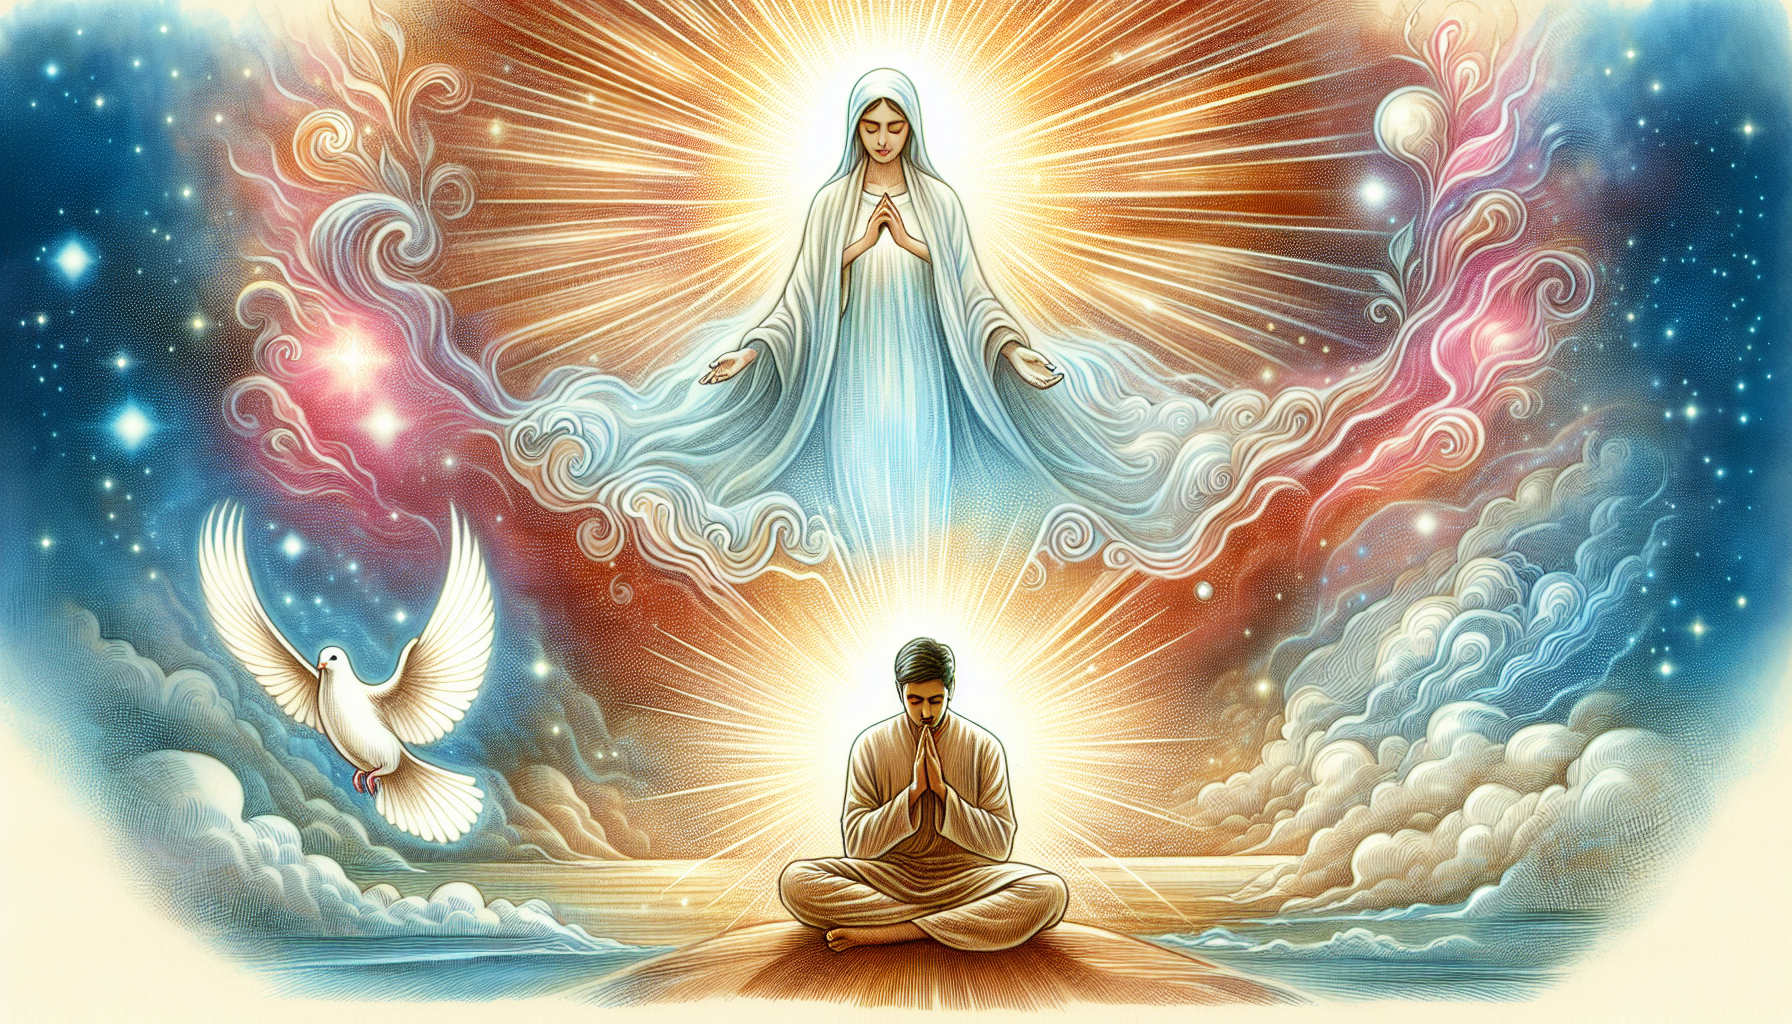 An ethereal scene featuring a serene figure enveloped in radiant, soft light representing the Holy Spirit. This figure hovers gracefully above a peaceful individual who is praying fervently with hands